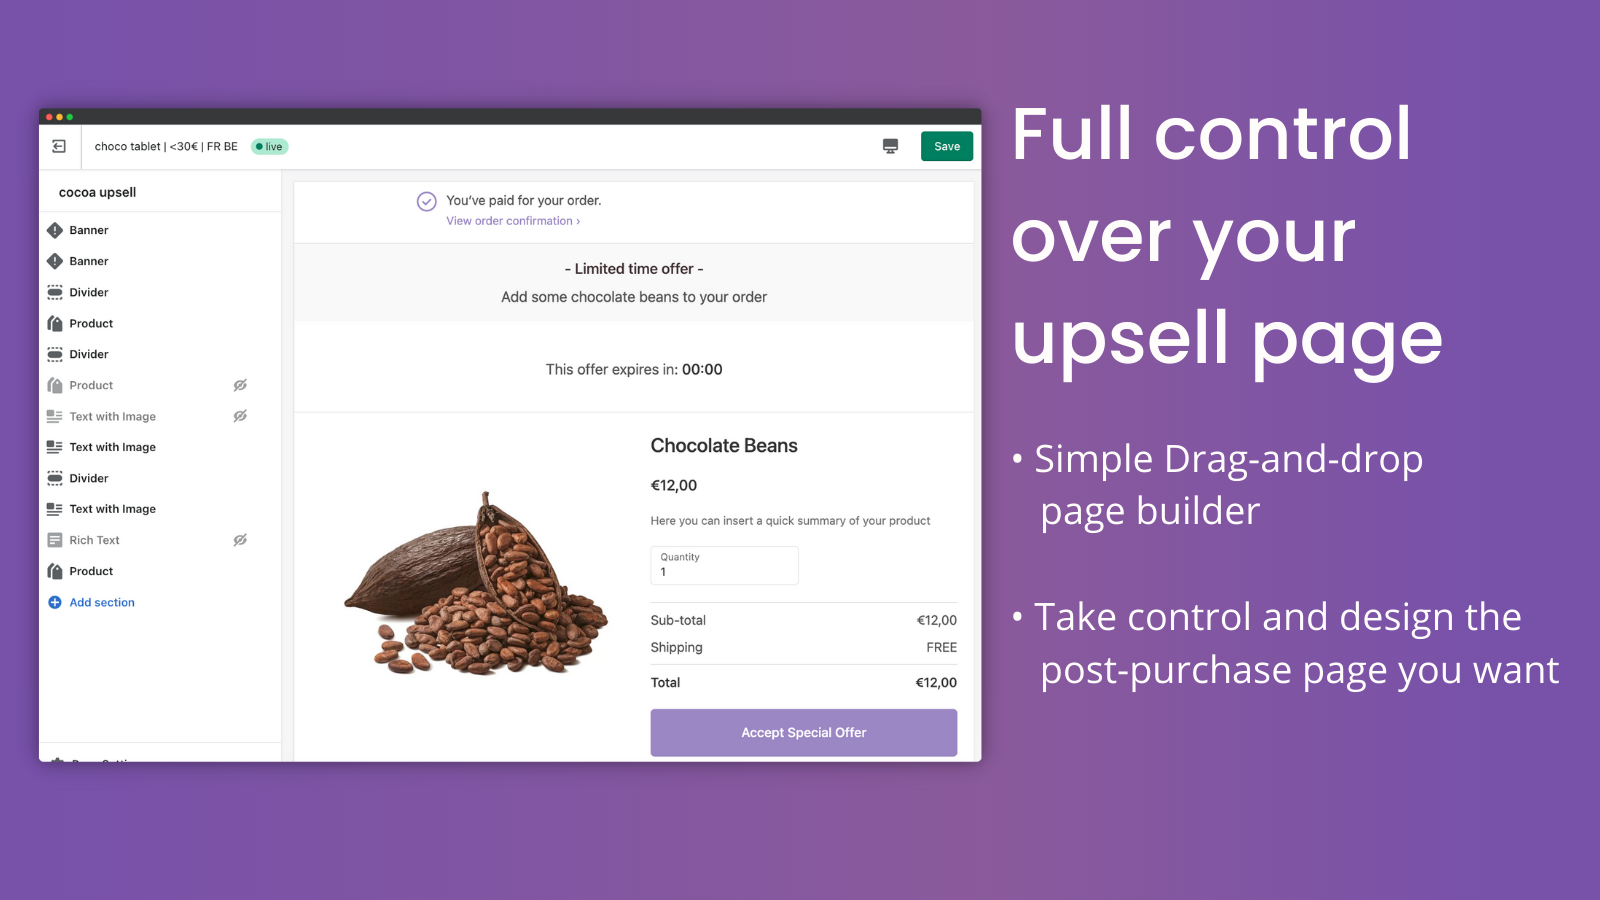 drag-and-drop page builder - full control over the upsell page